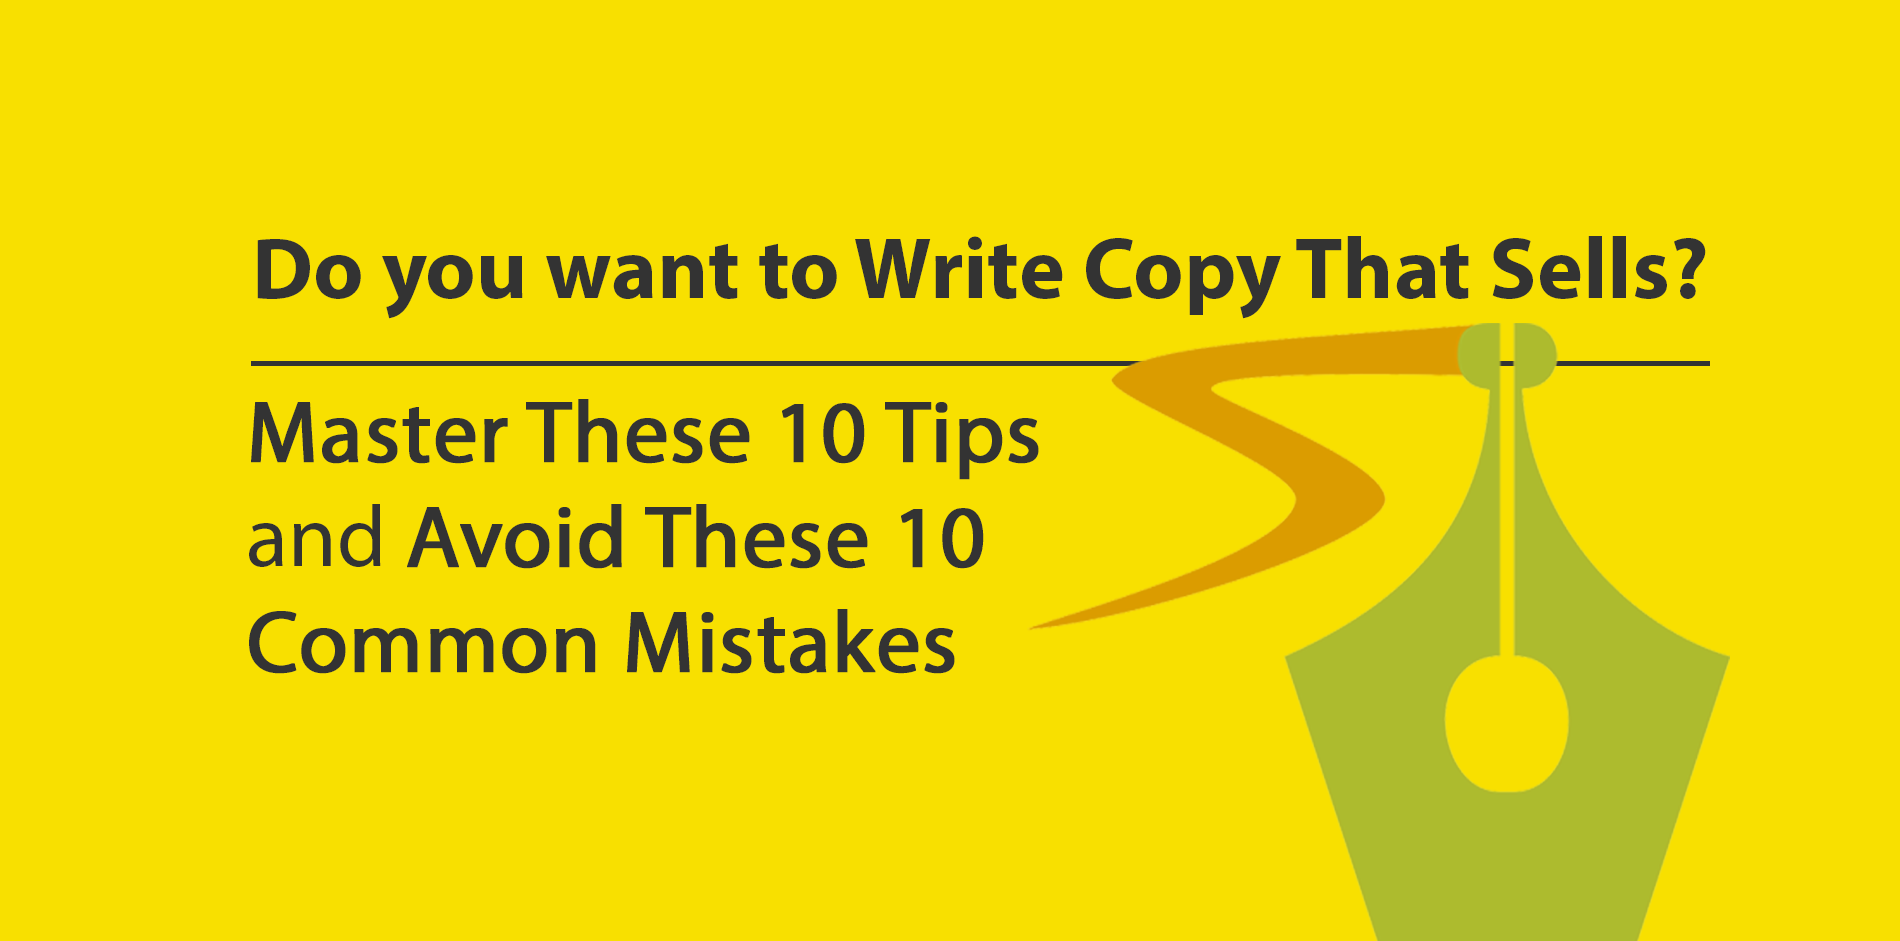 20 expert tips to help improve your copywriting